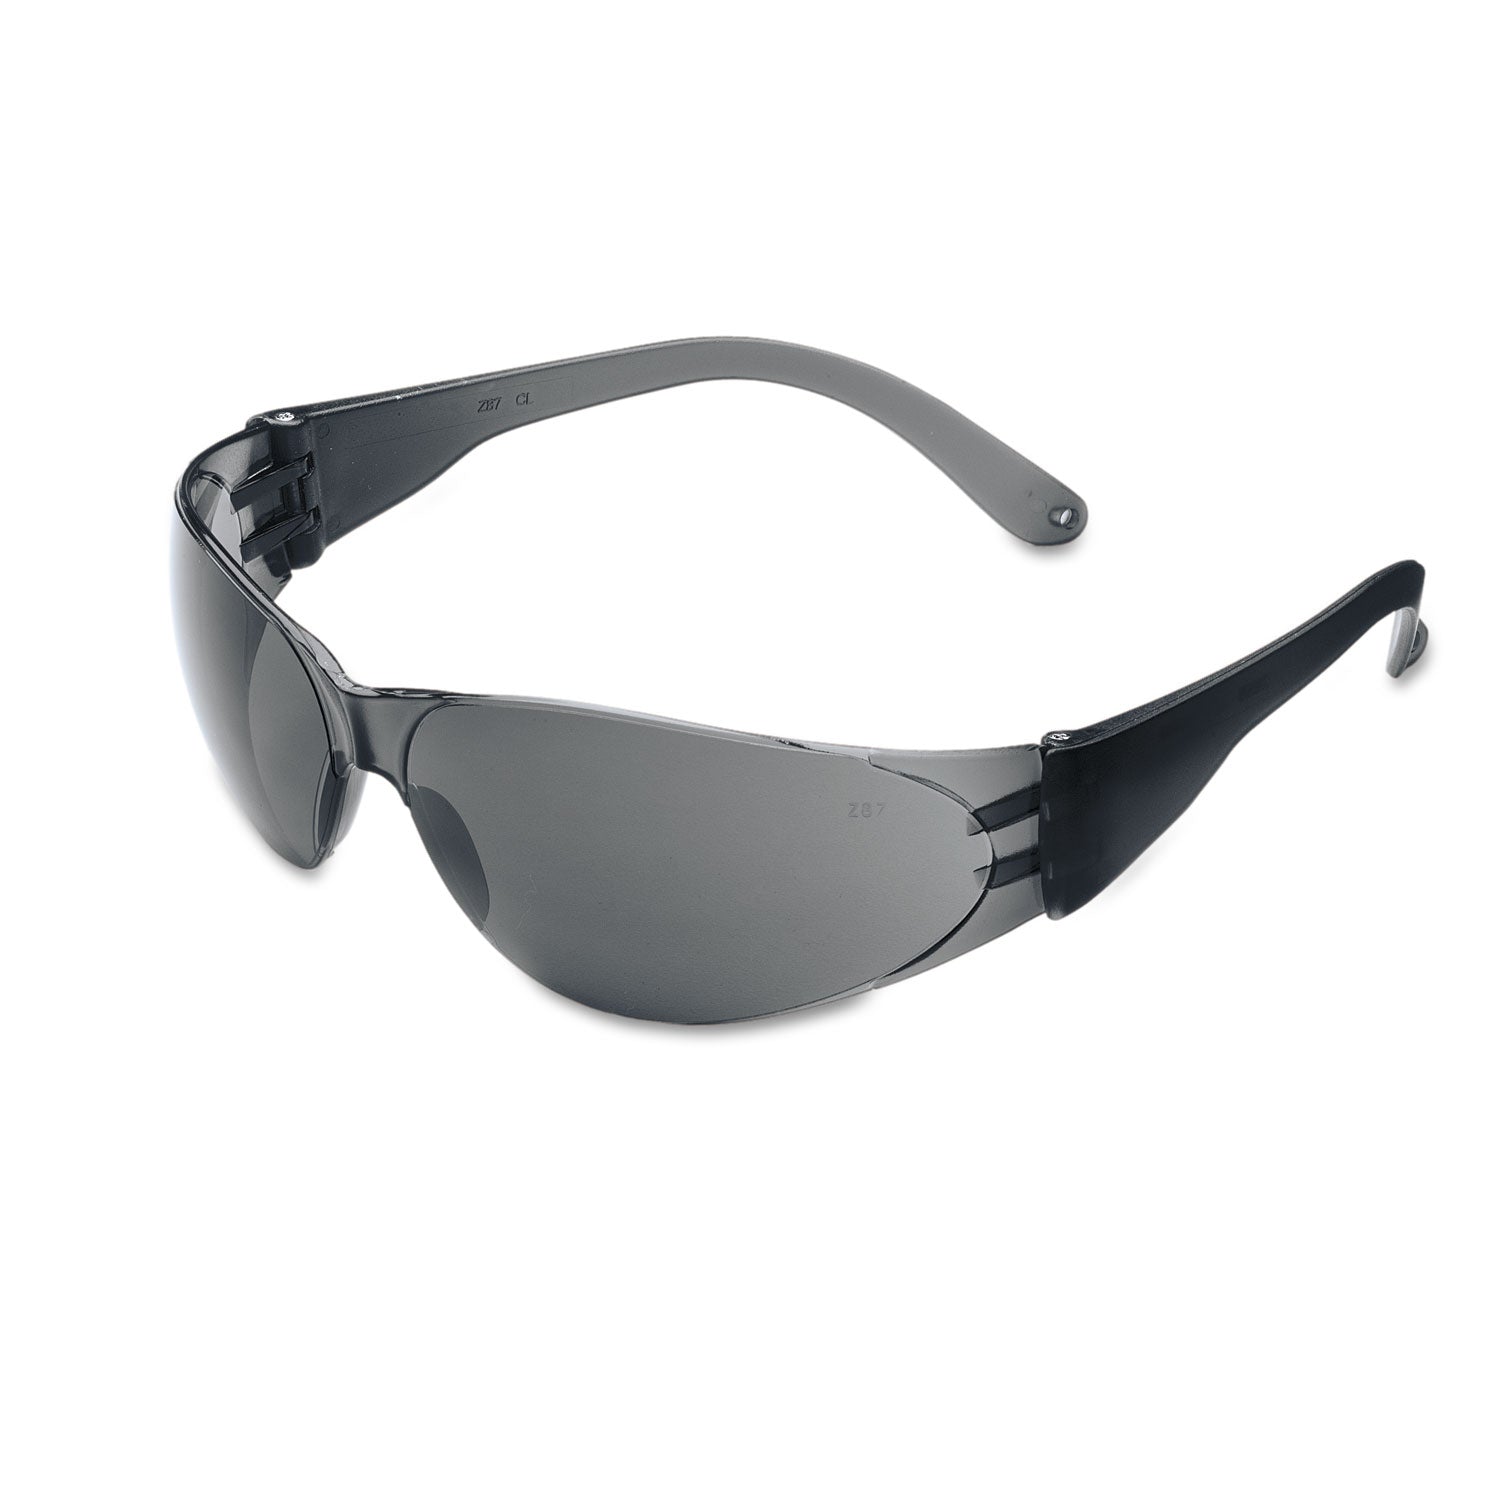 checklite-scratch-resistant-safety-glasses-gray-lens-12-box_crwcl112bx - 1